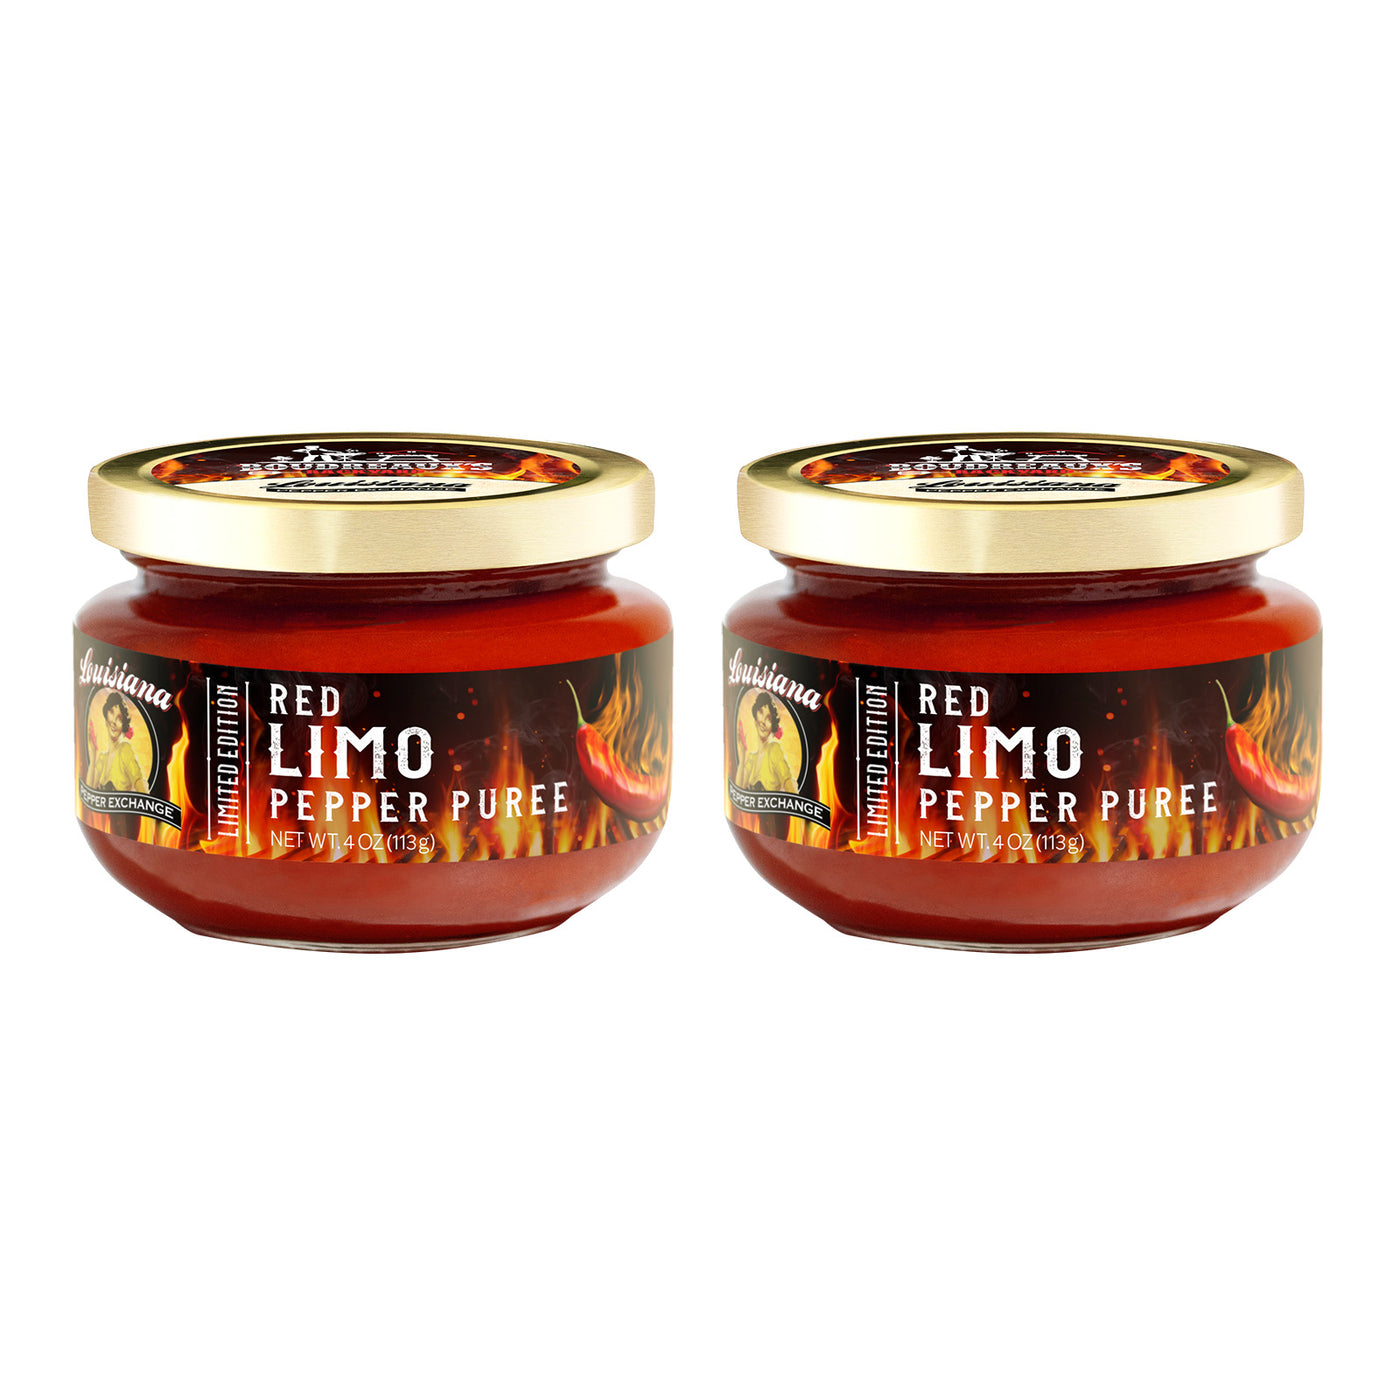 Red Limo Pepper Puree from Louisiana Pepper Exchange X Boudreaux's Backyard - LIMITED EDITION